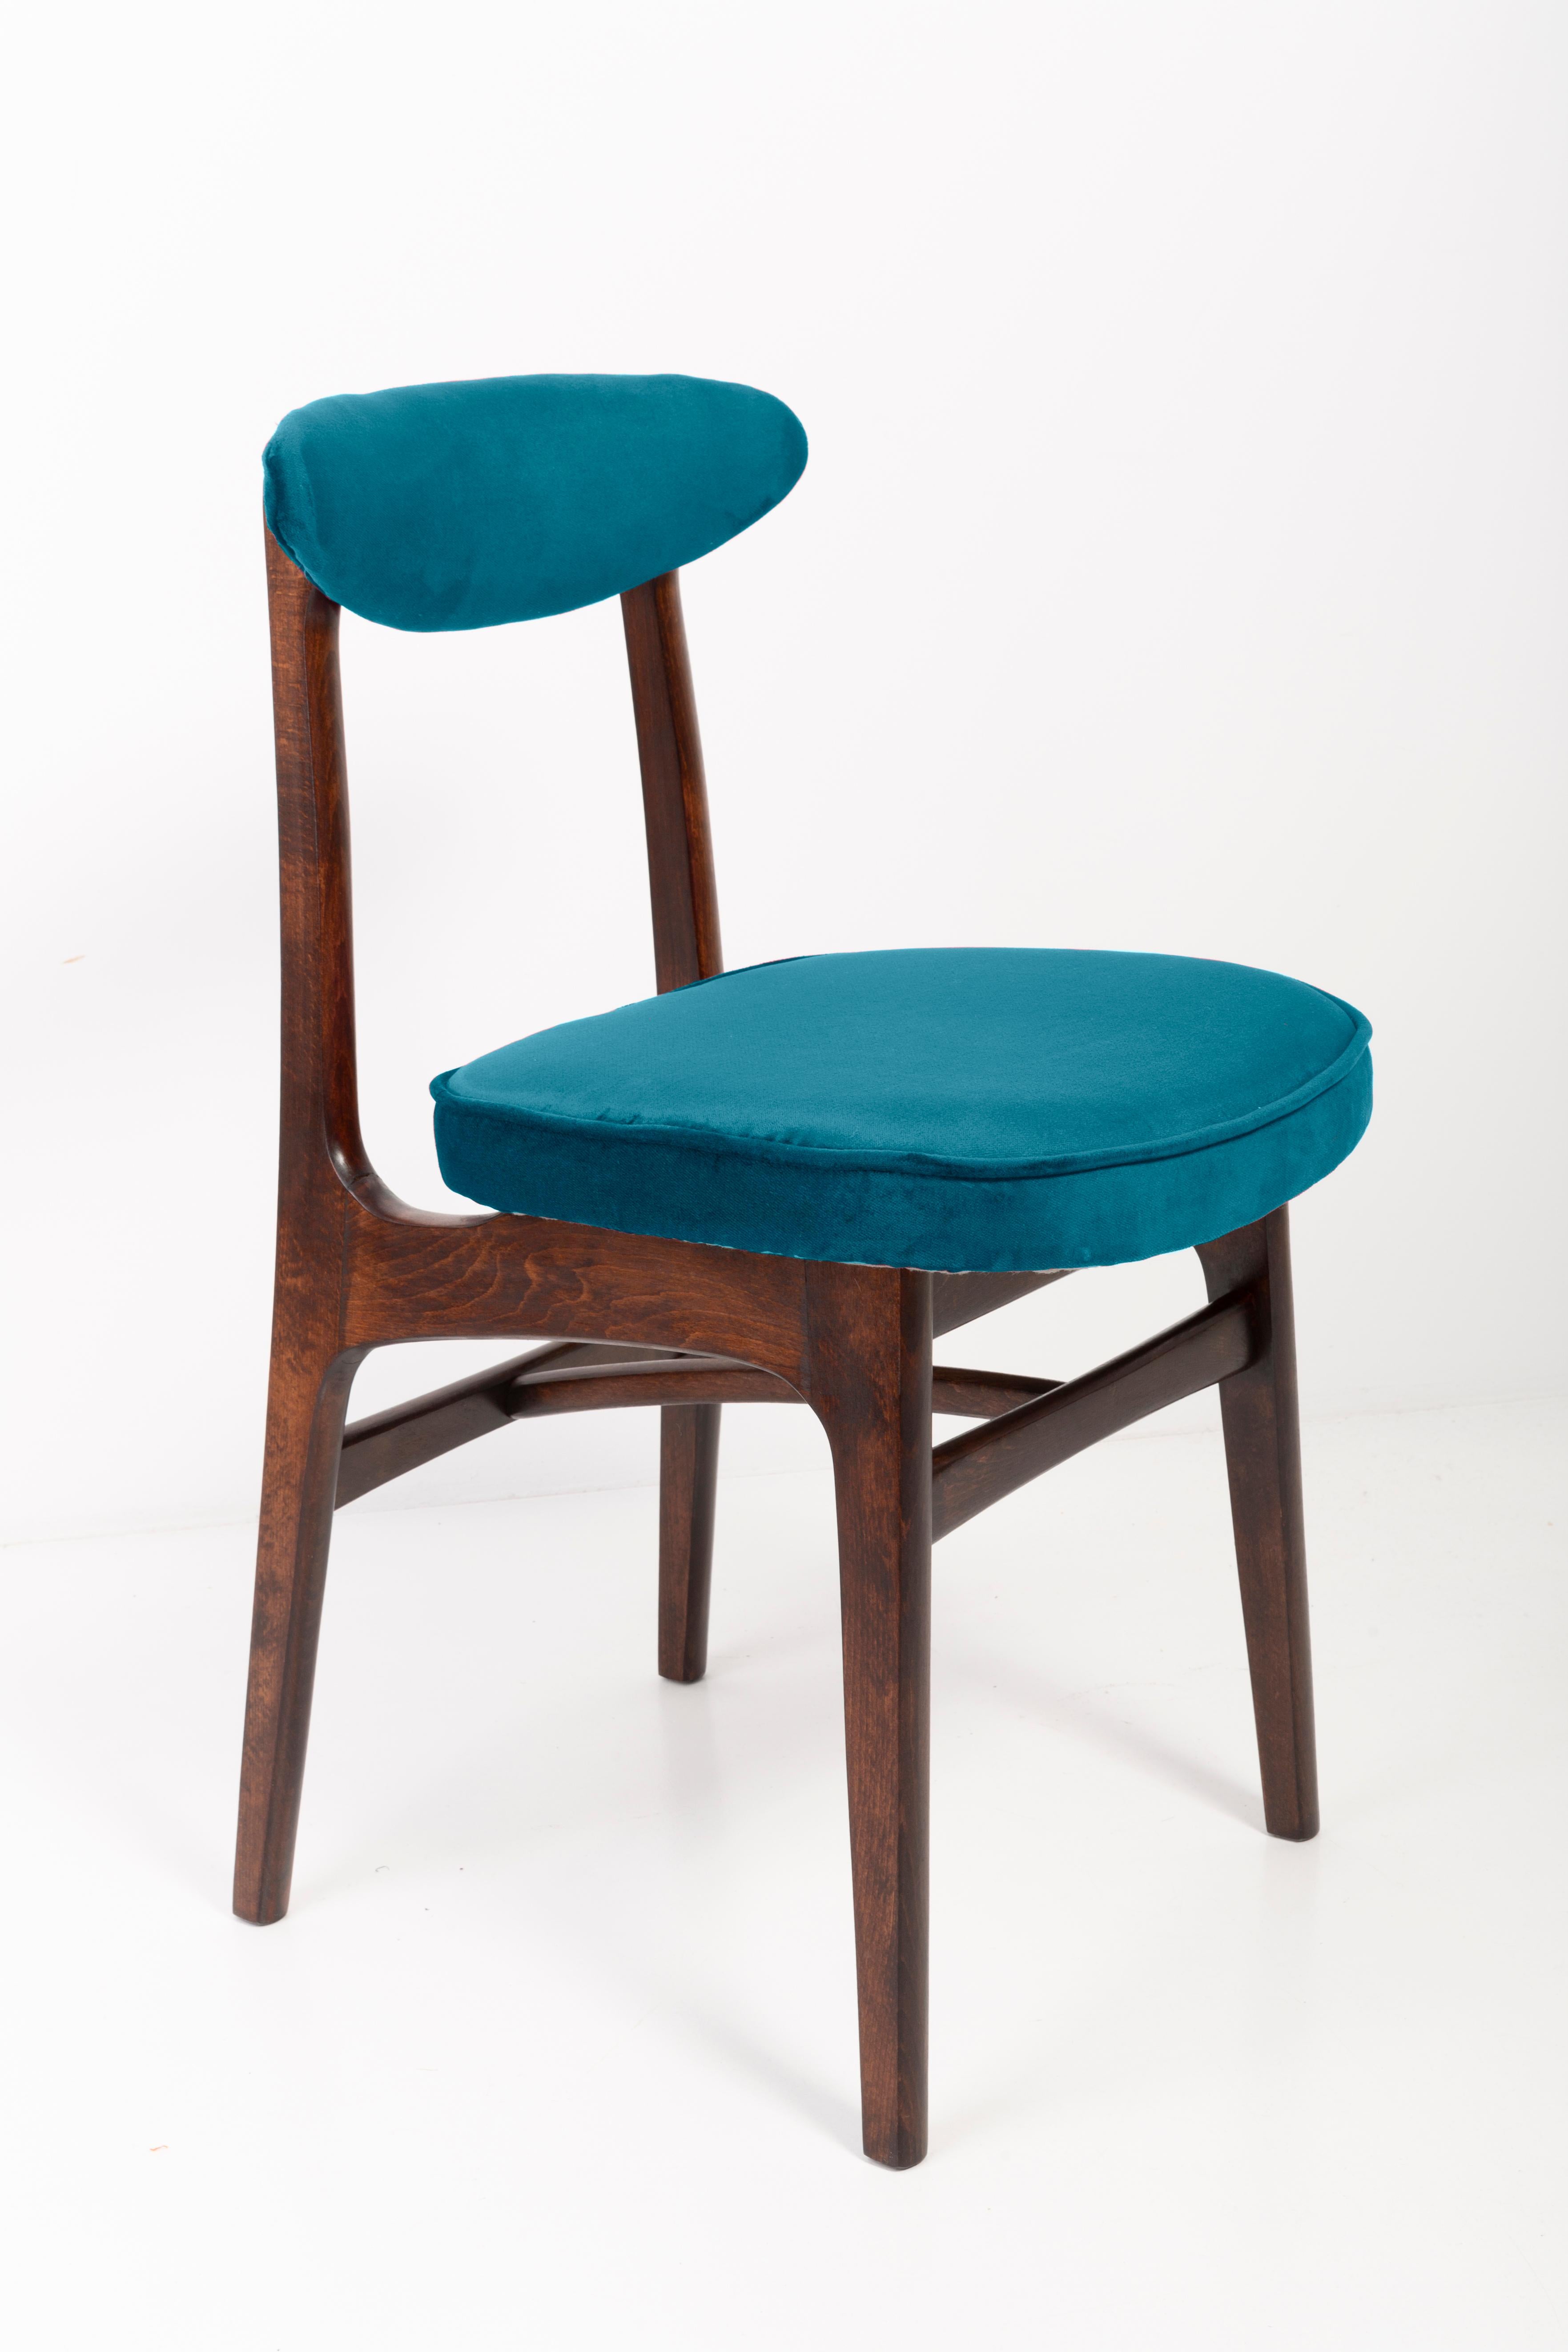 Light form nice vintage chair designed by Prof. Rajmund Halas. It has been made of beechwood. Chair is after undergone a complete upholstery renovation, the woodwork has been refreshed. Seats and backs were dressed in a petrol blue (color 973),